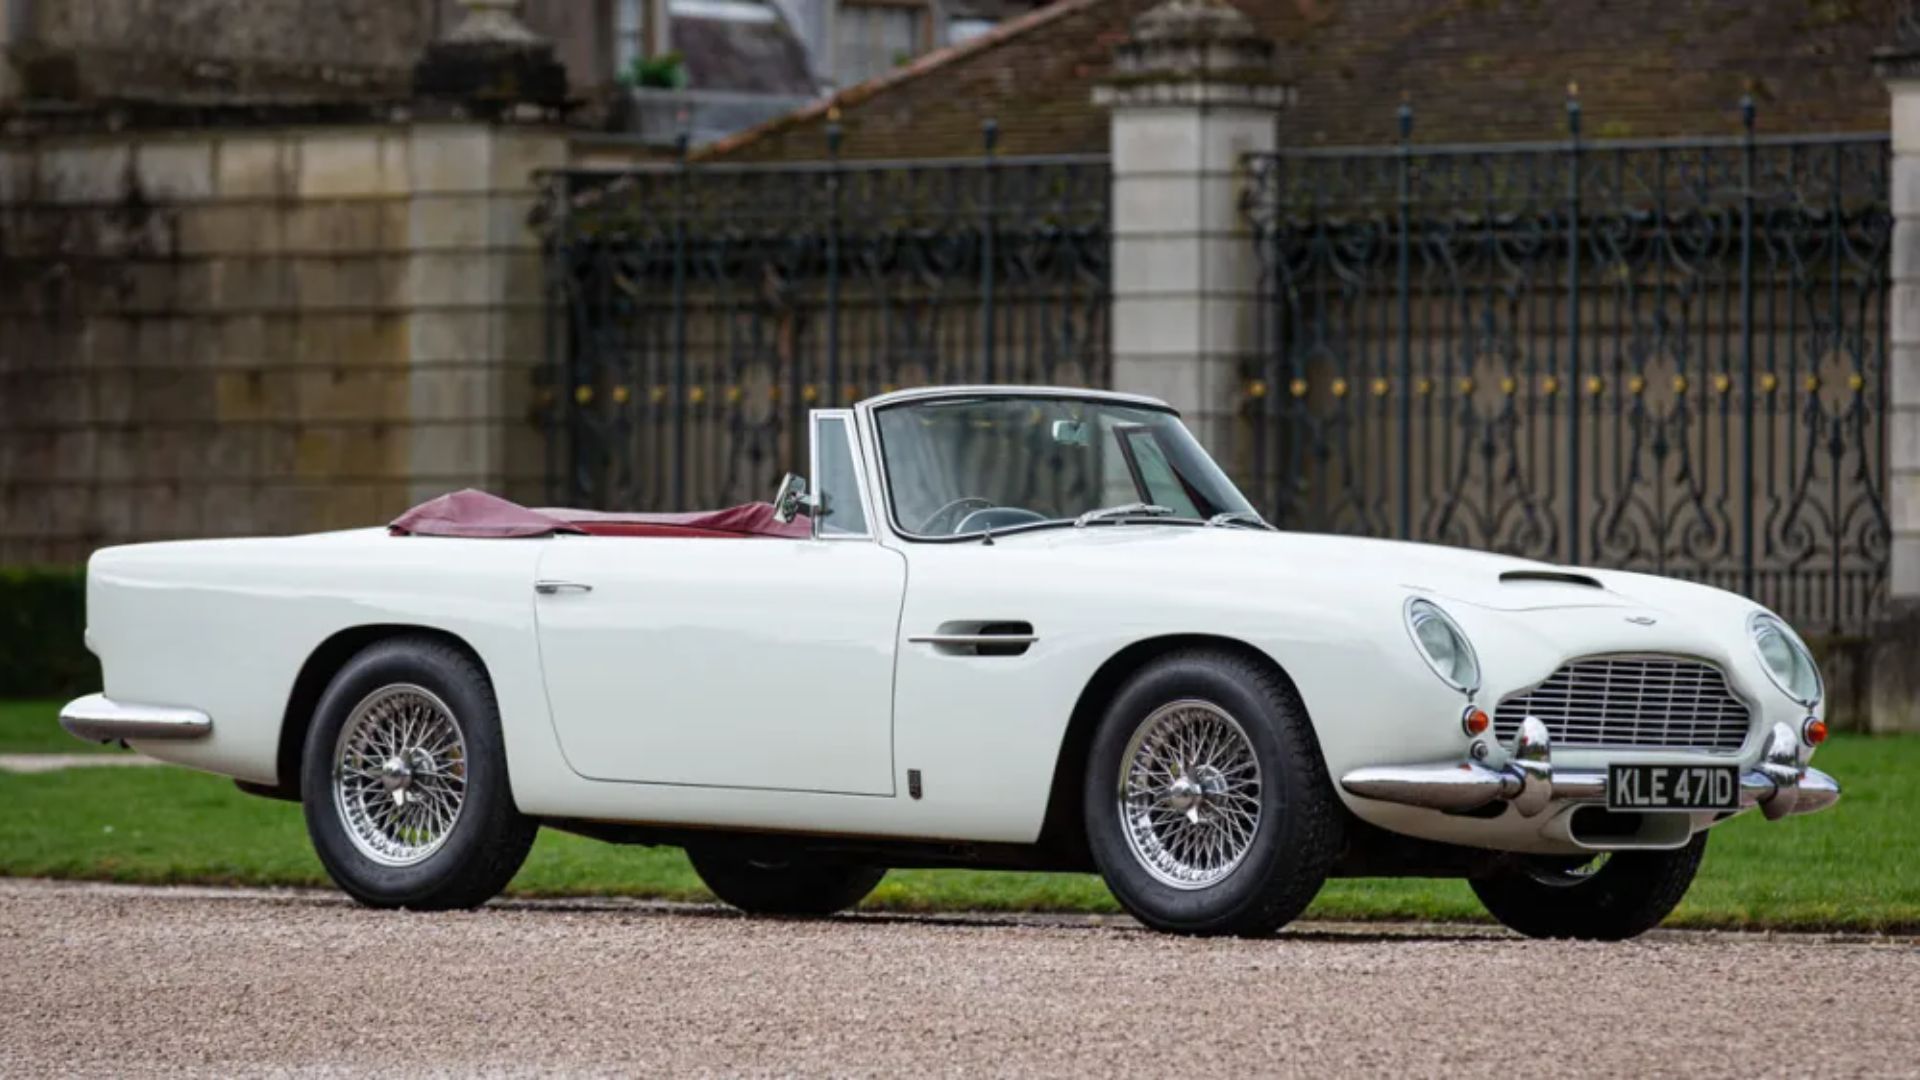 Rare 1965 Aston Martin DB5 Convertible Expected to Fetch $1.3 Million at Auction